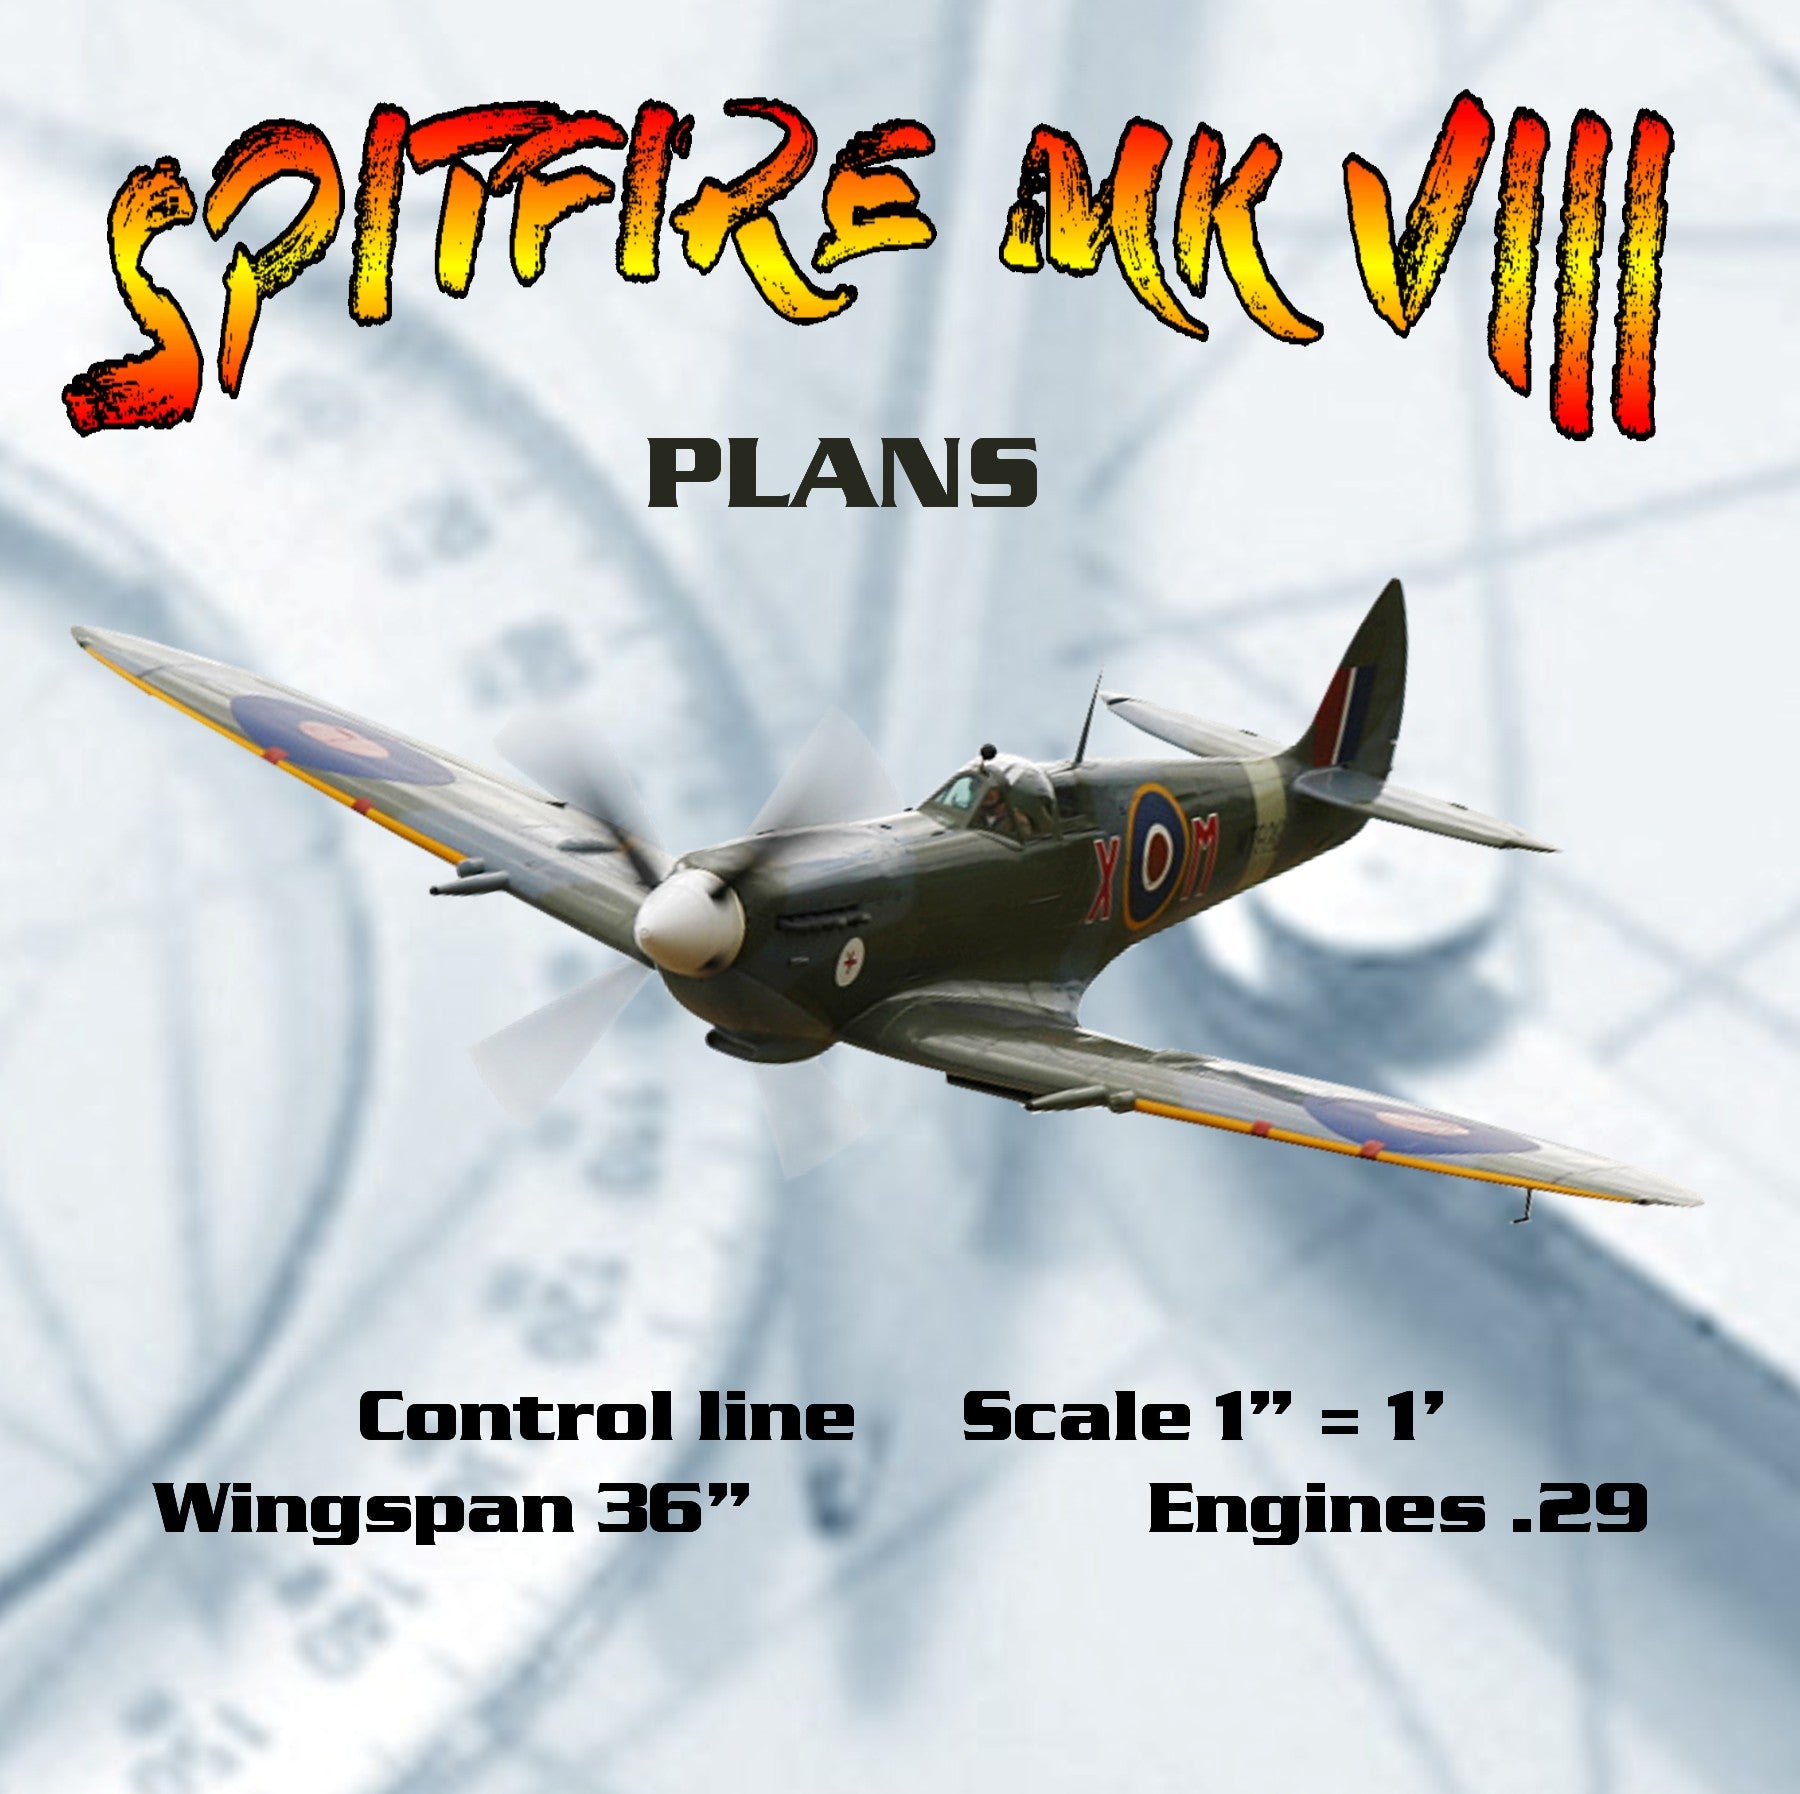 full size printed plans  control line  scale 1” = 1’ spitfire mk viii  wingspan 36”  engines .29